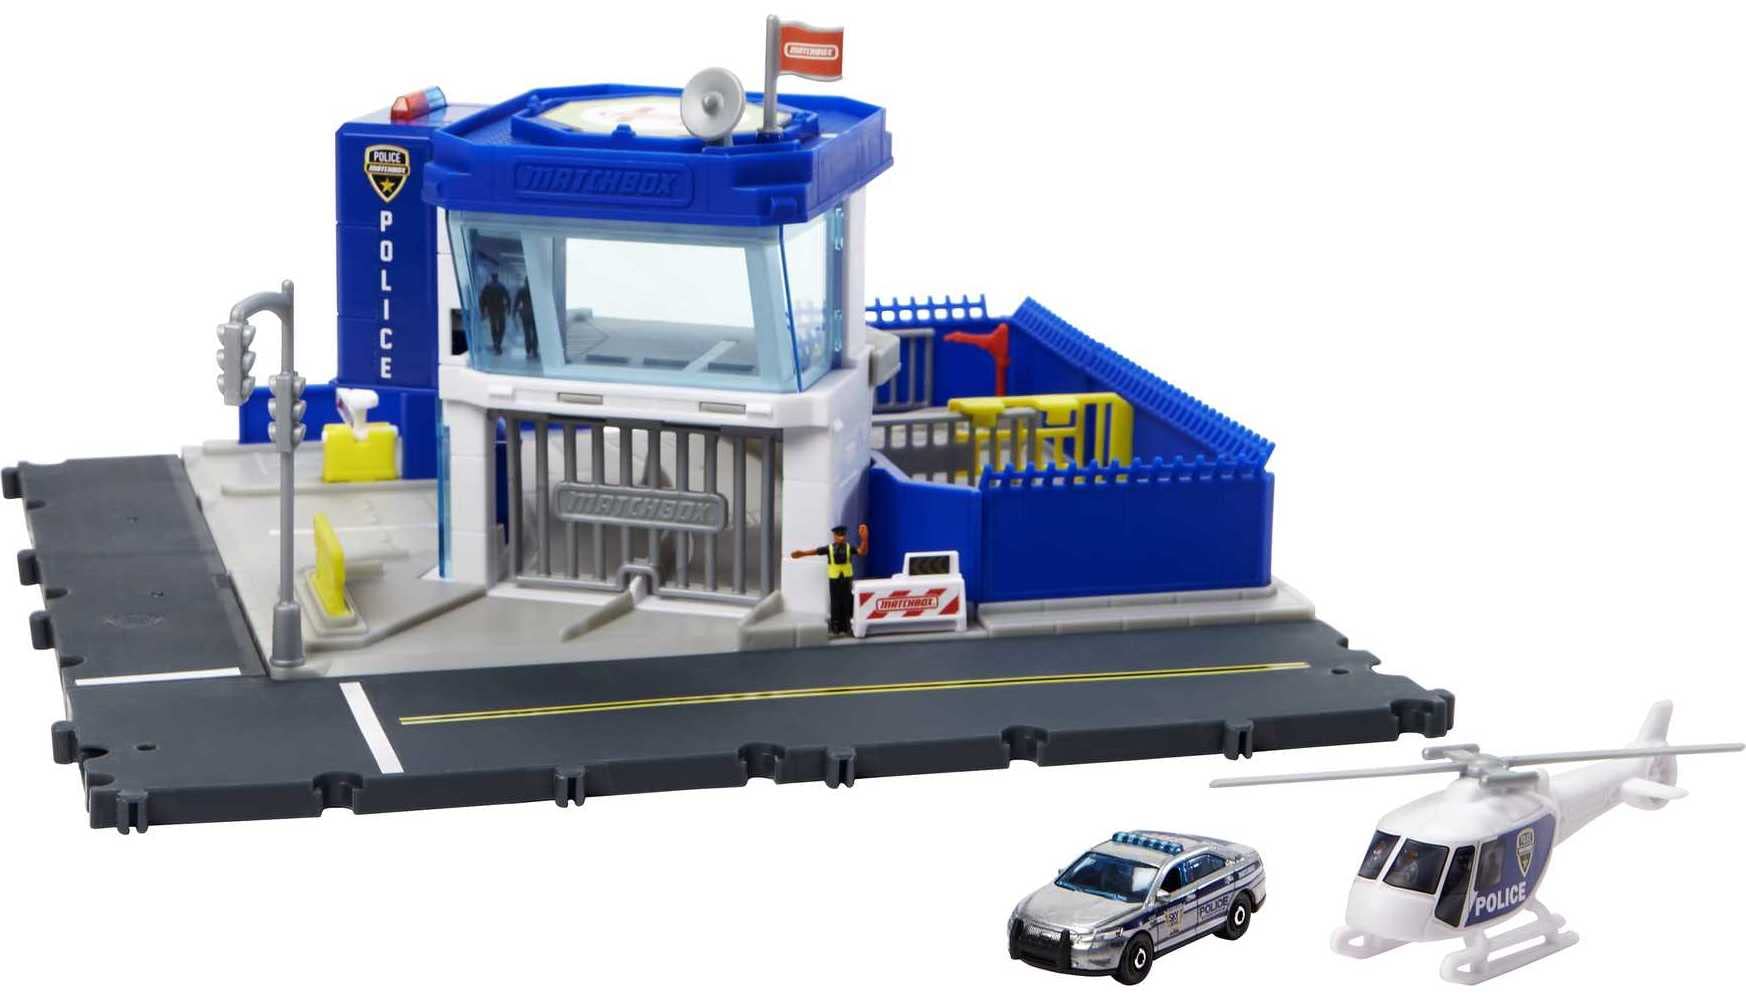 Matchbox Action Drivers Police Station Dispatch Playset w/ Helicopter + Police Car $7 + Free Shipping w/ Prime or on $25+